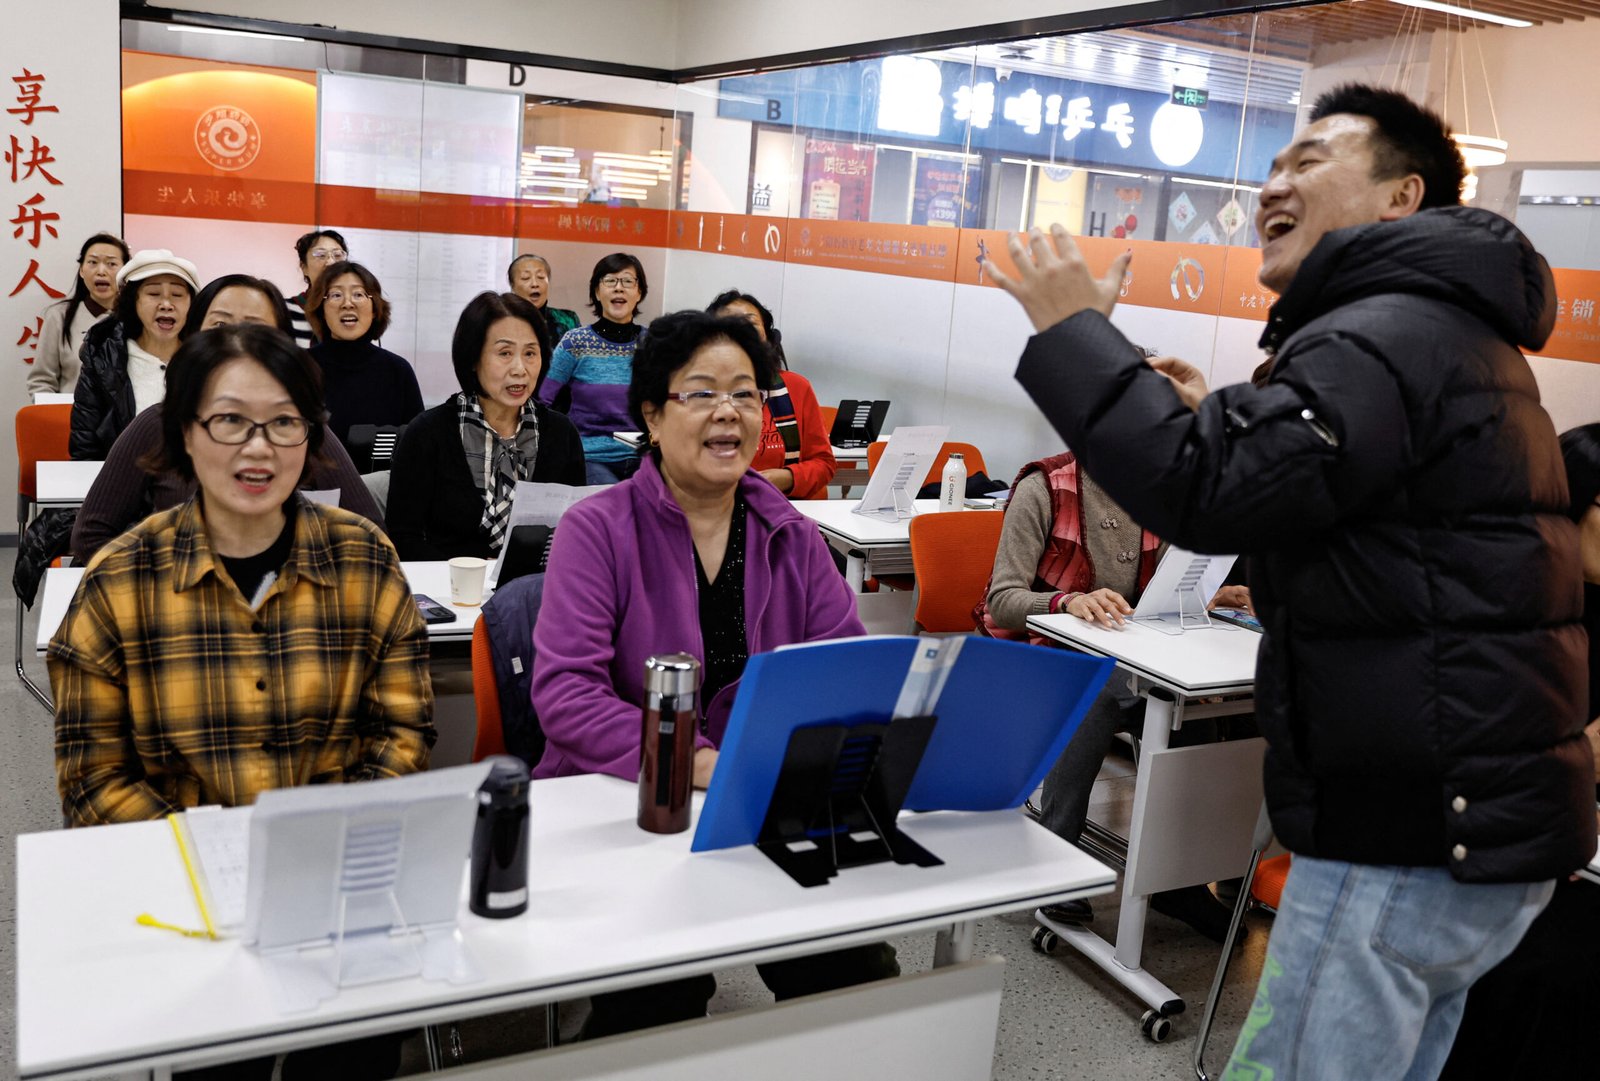 Silver lining Tutoring the elderly is growing fast in China